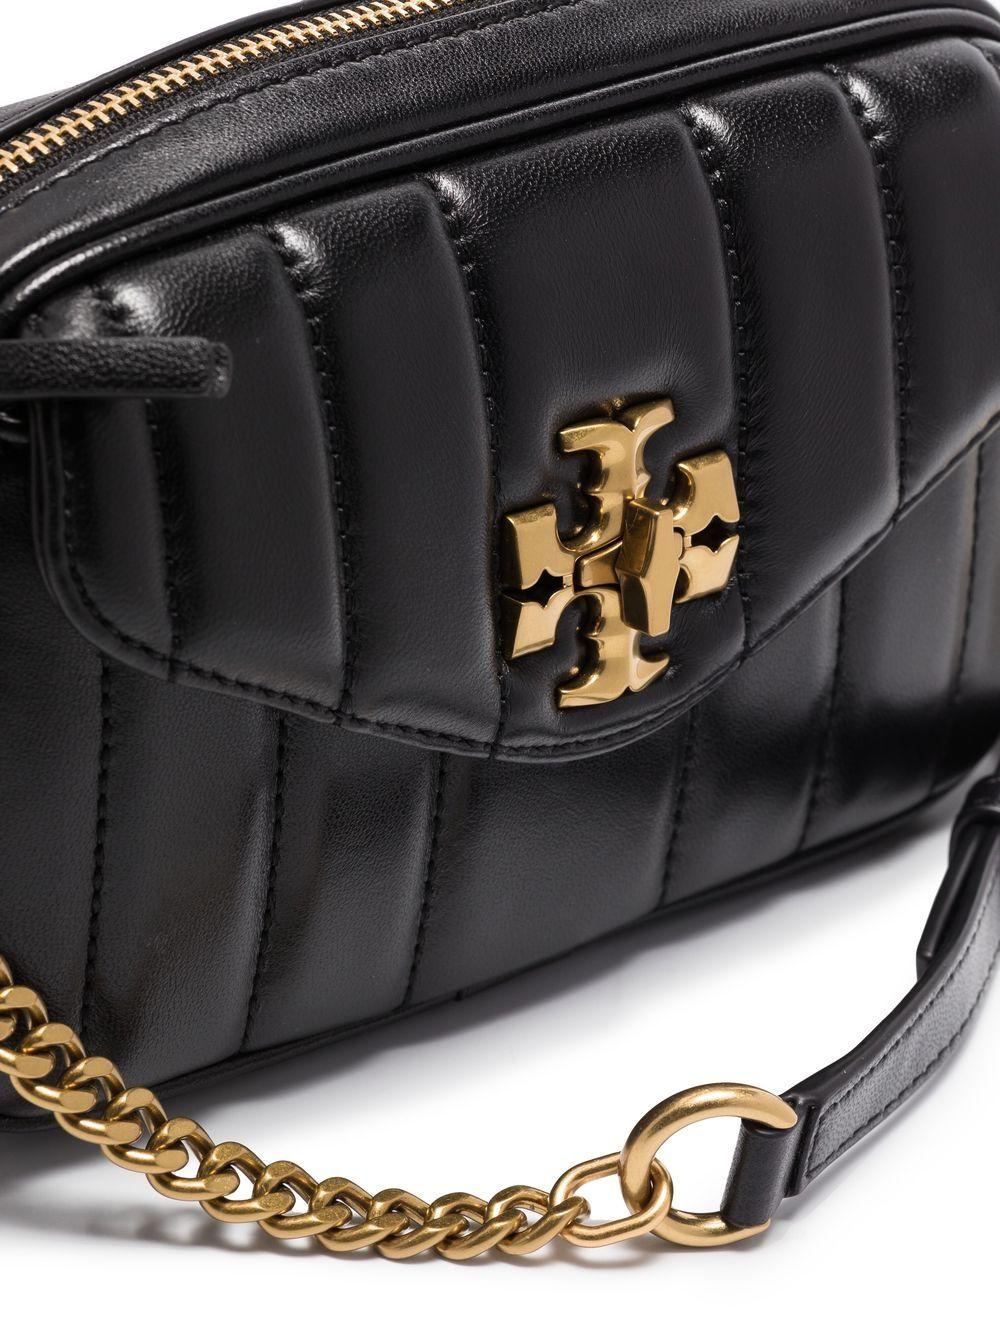 Tory Burch Black Kira Chevron Quilted Leather Camera Crossbody Bag, Best  Price and Reviews